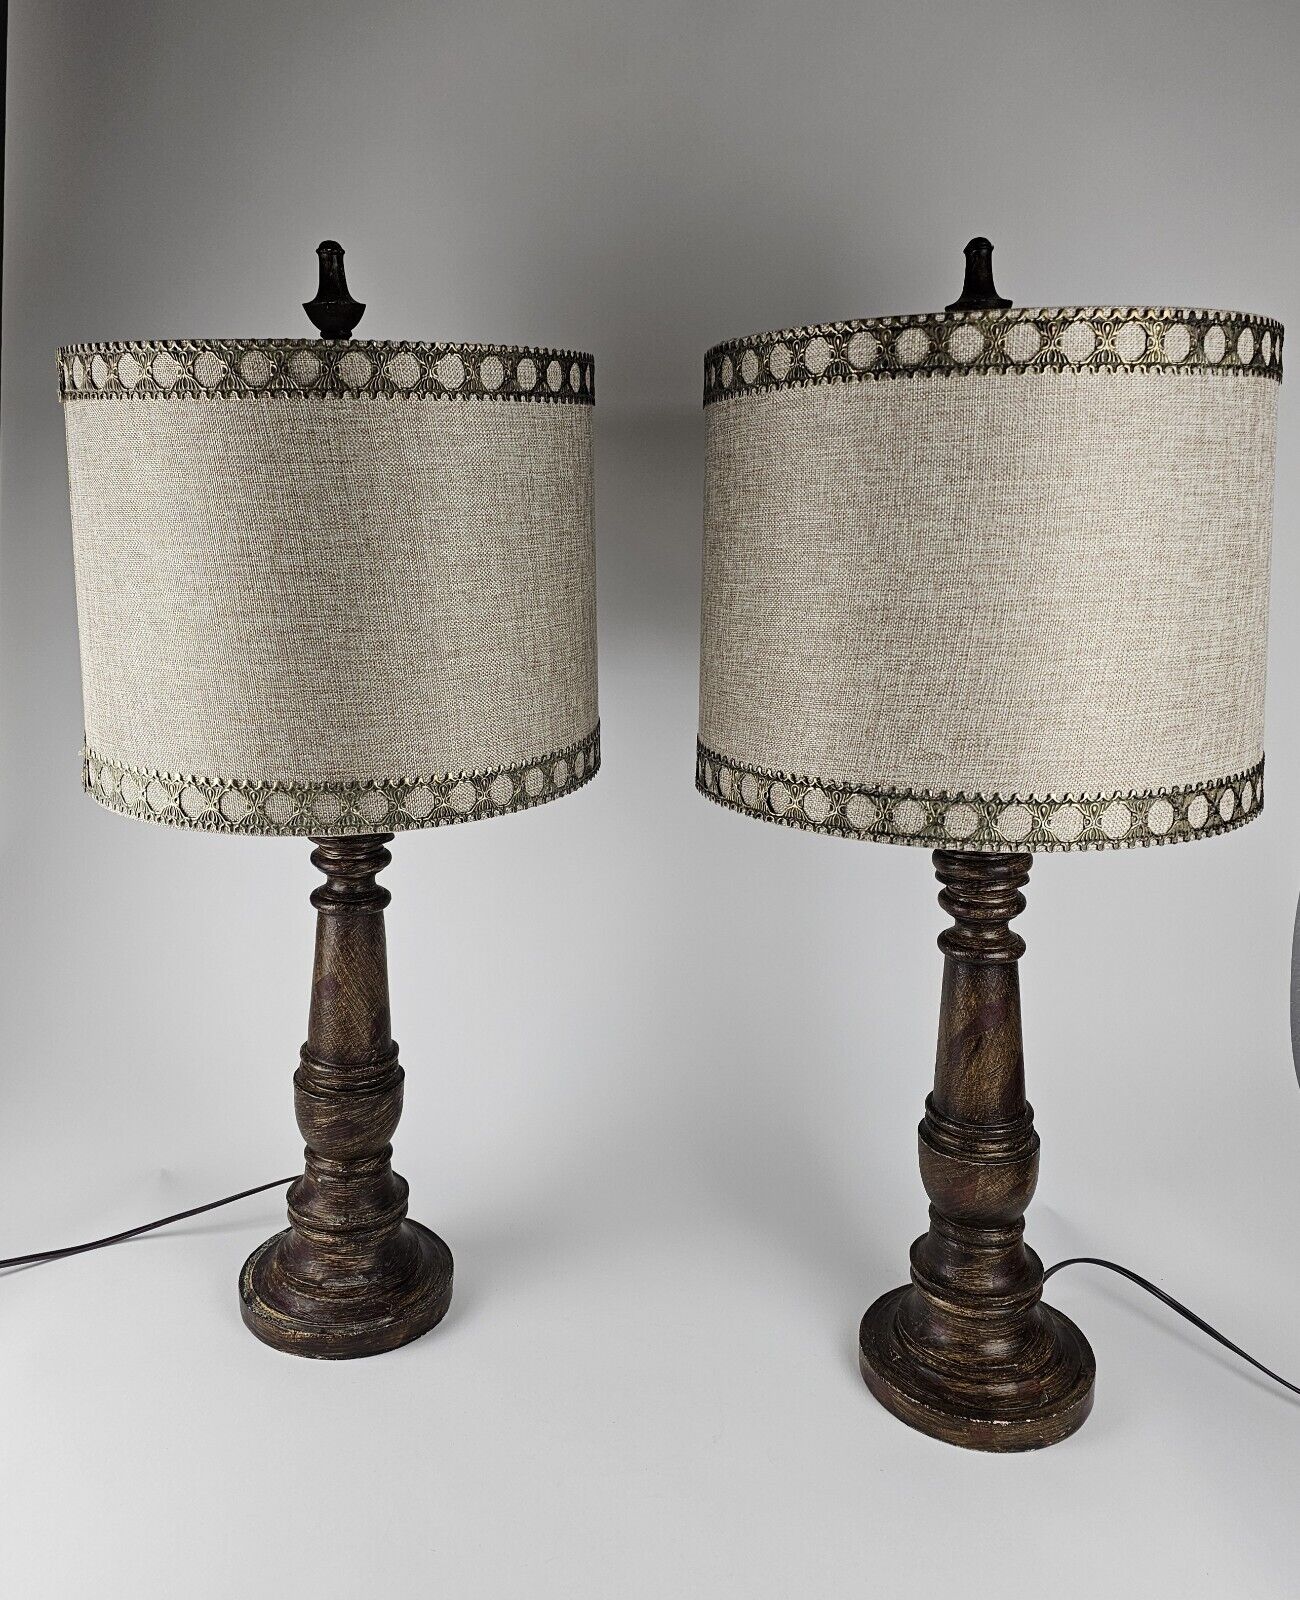 Retro Vintage PAIR Electric Tabletop Lamps Rustic Wood Style Decorative Shades